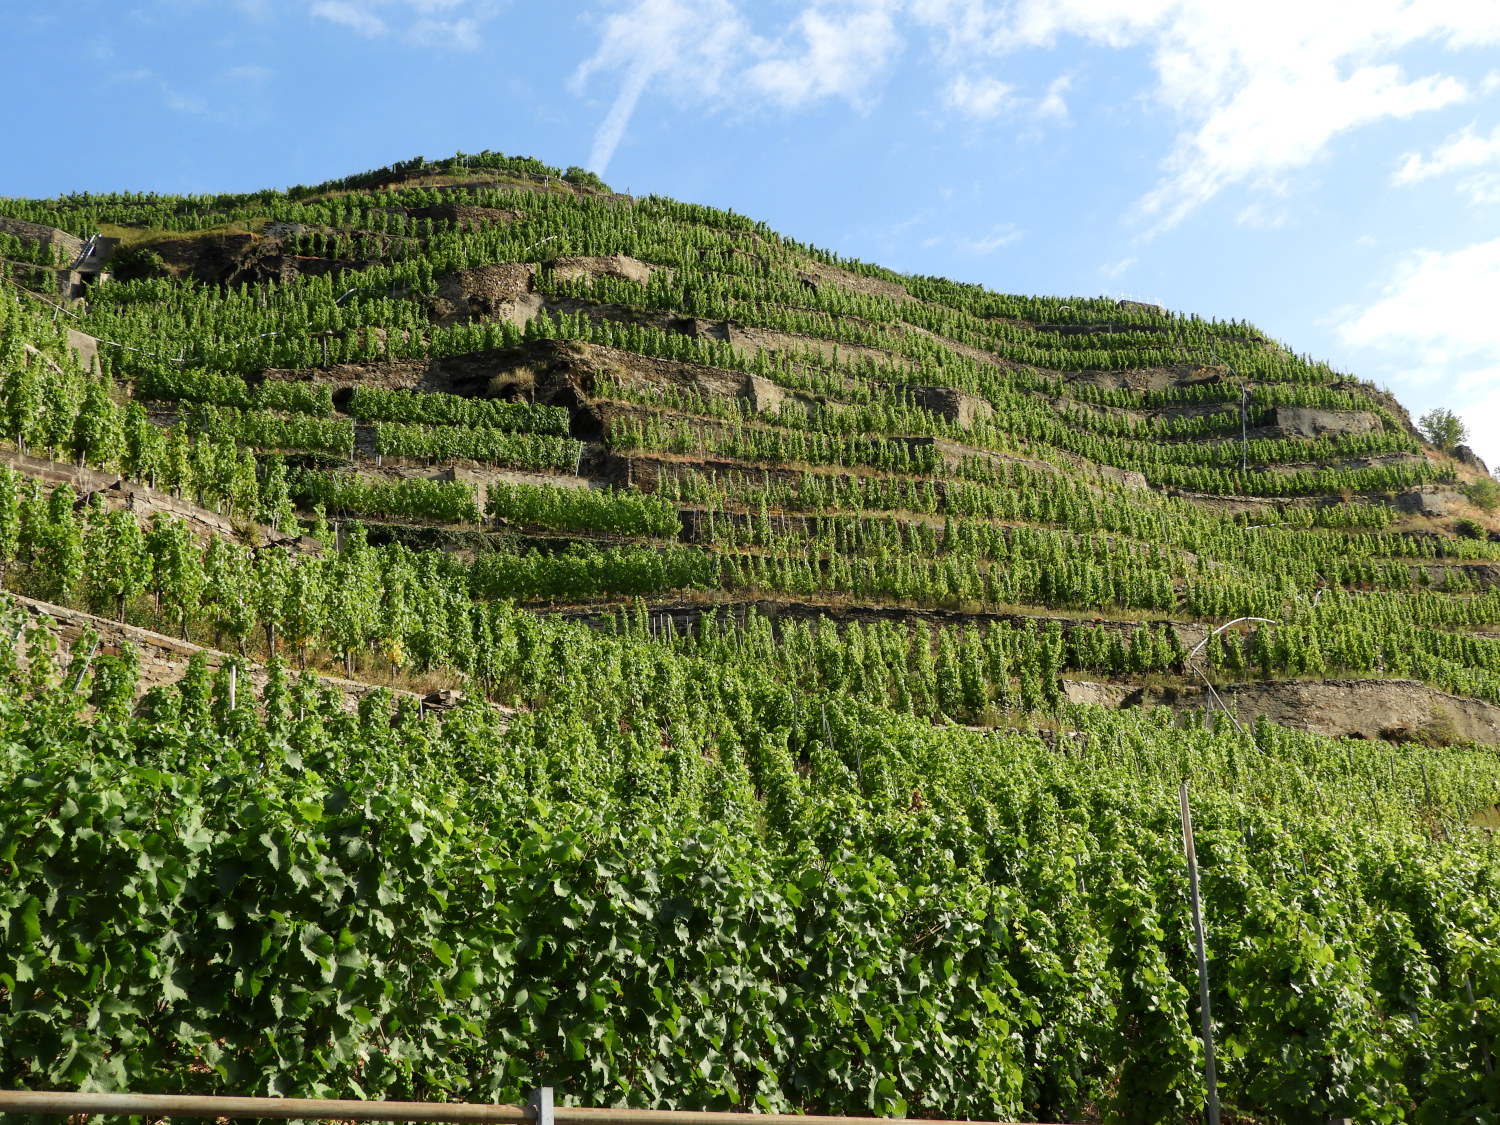 Vines fill the slopes of the Mosel valley